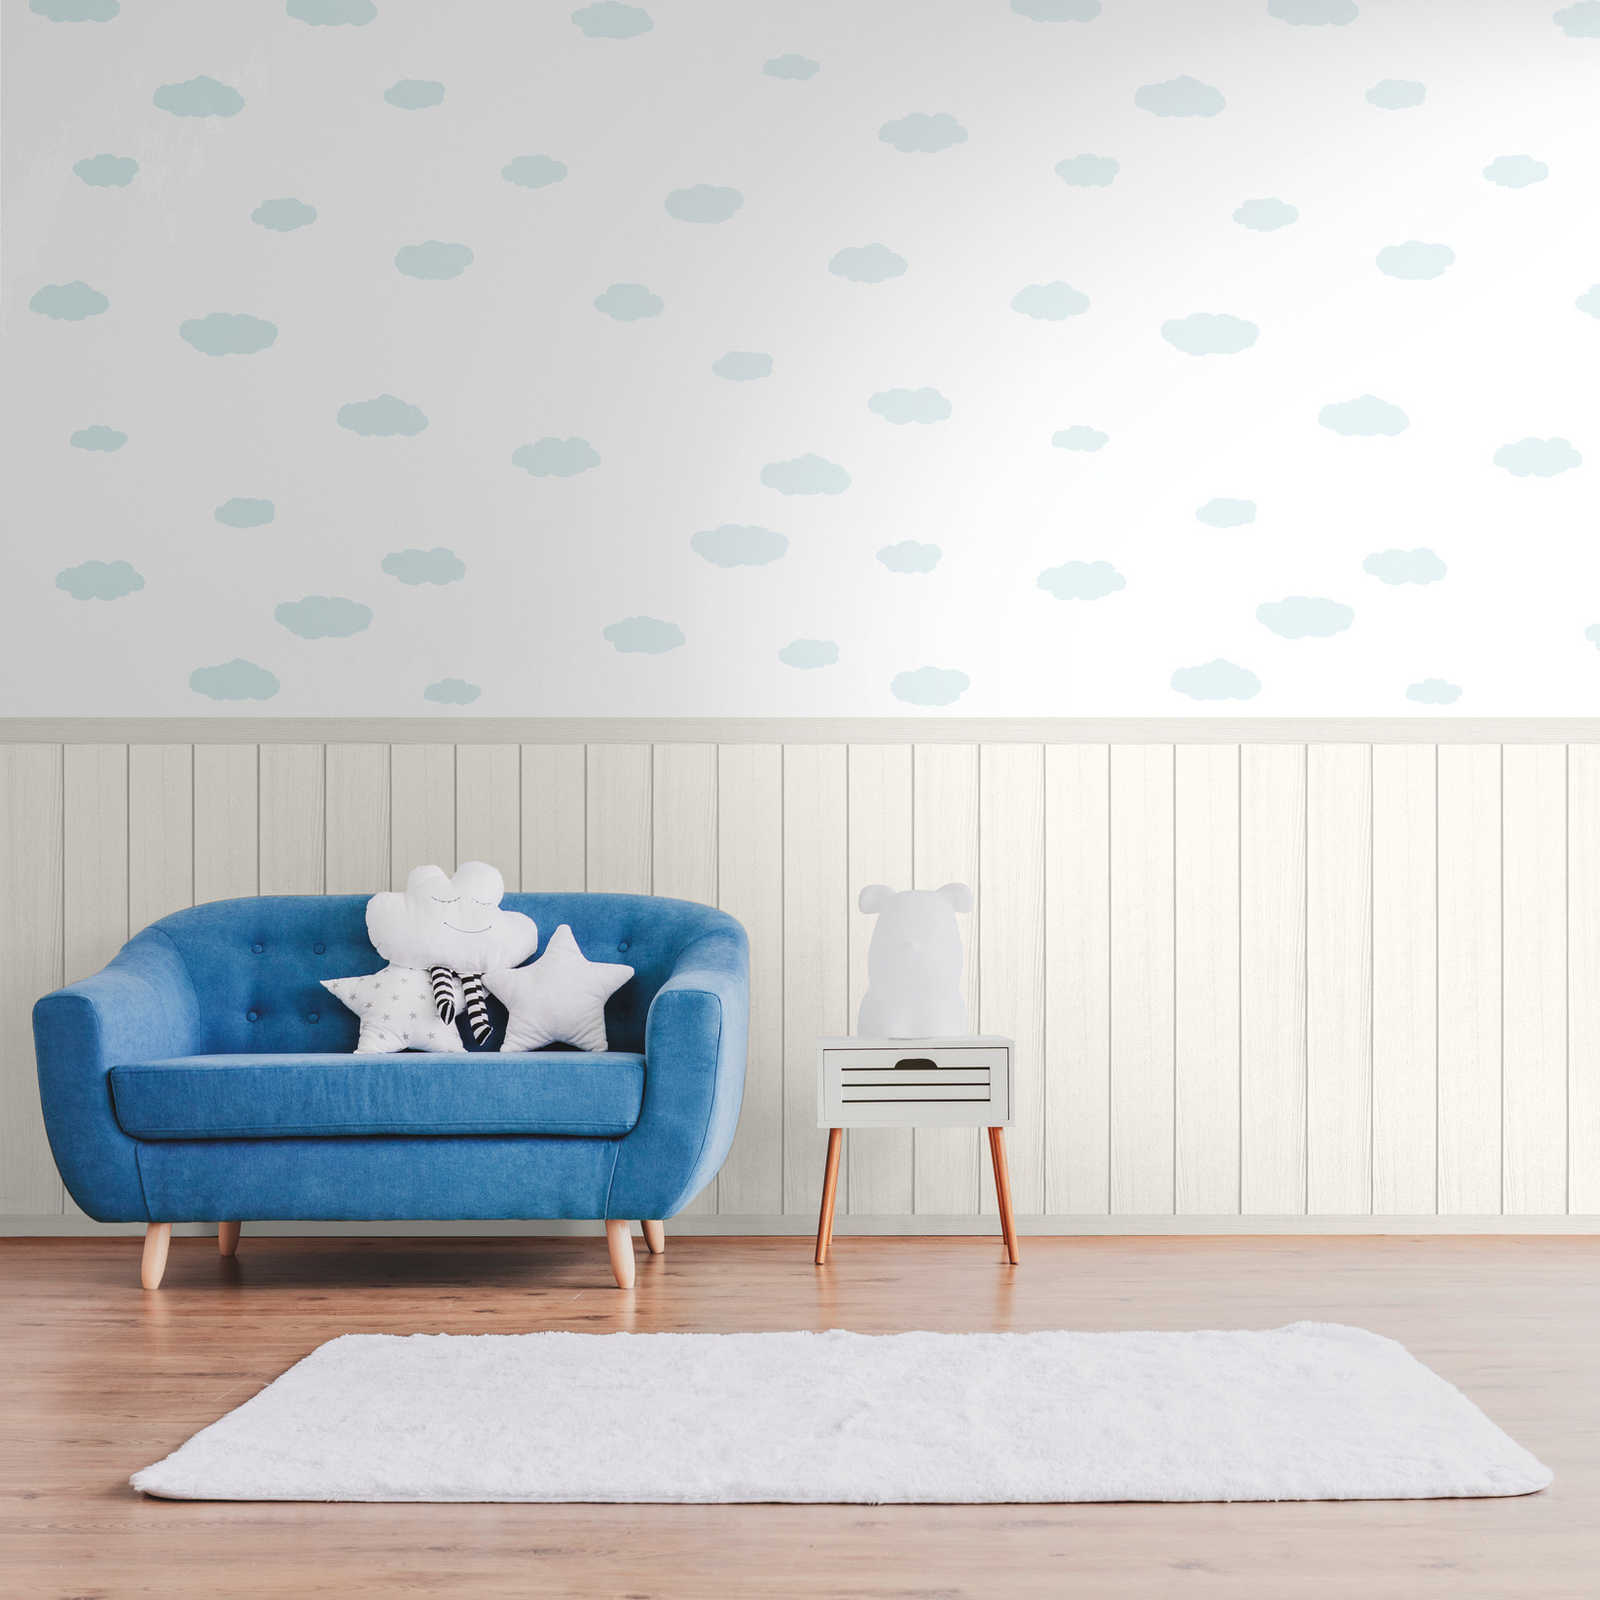 Non-woven motif wallpaper with wood-effect plinth border and cloud pattern - white, blue, grey
